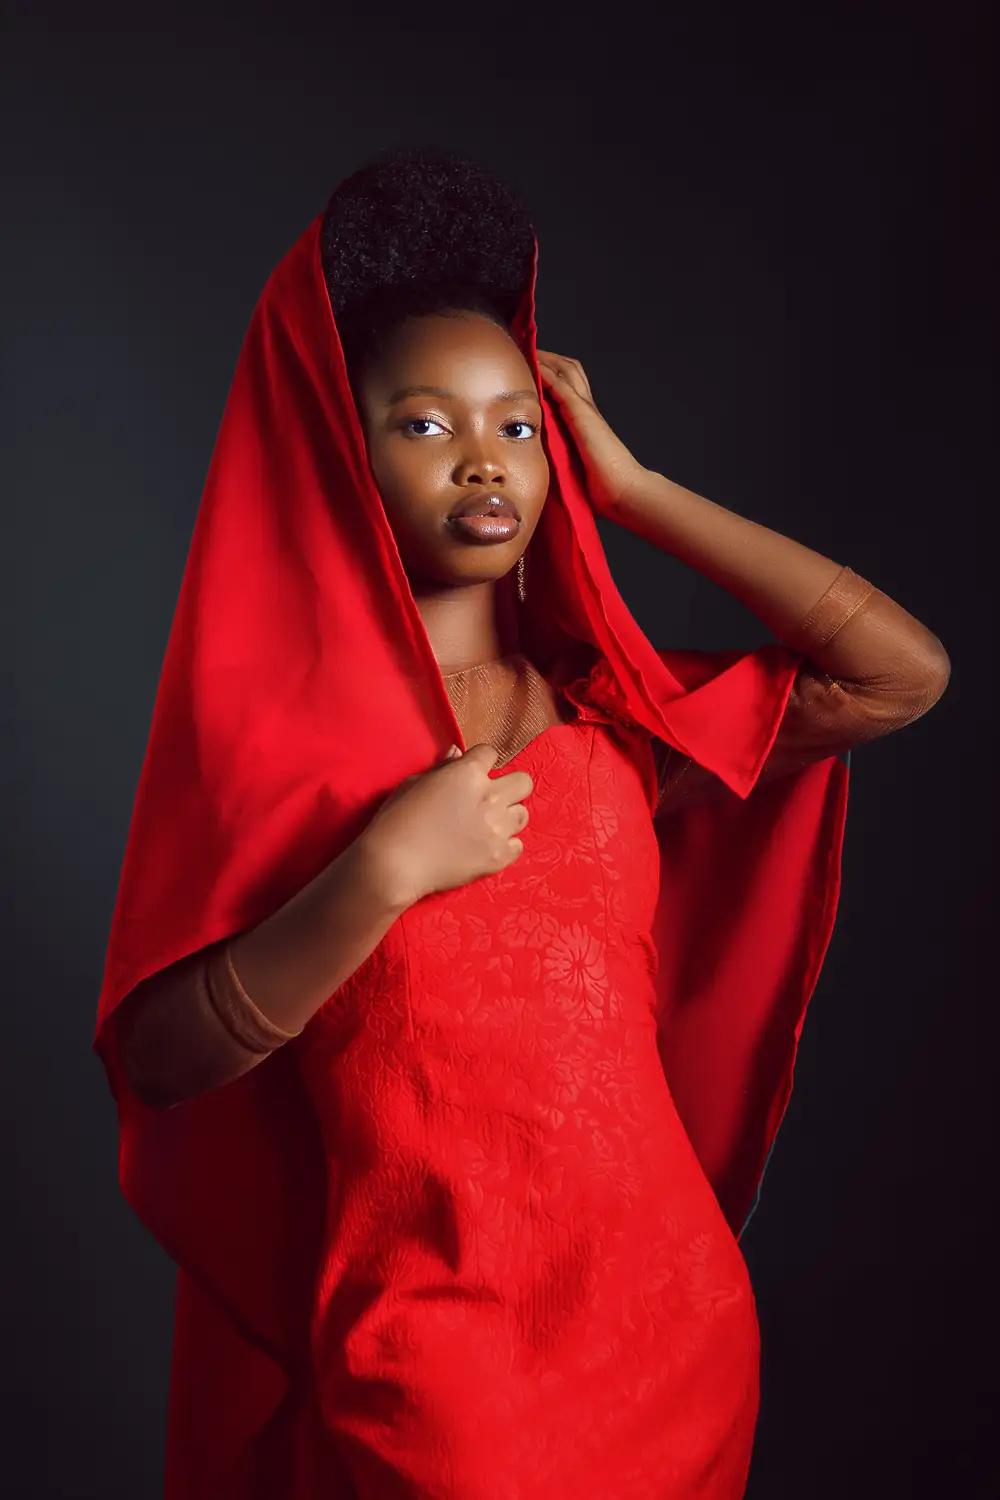 Young lady in red posing